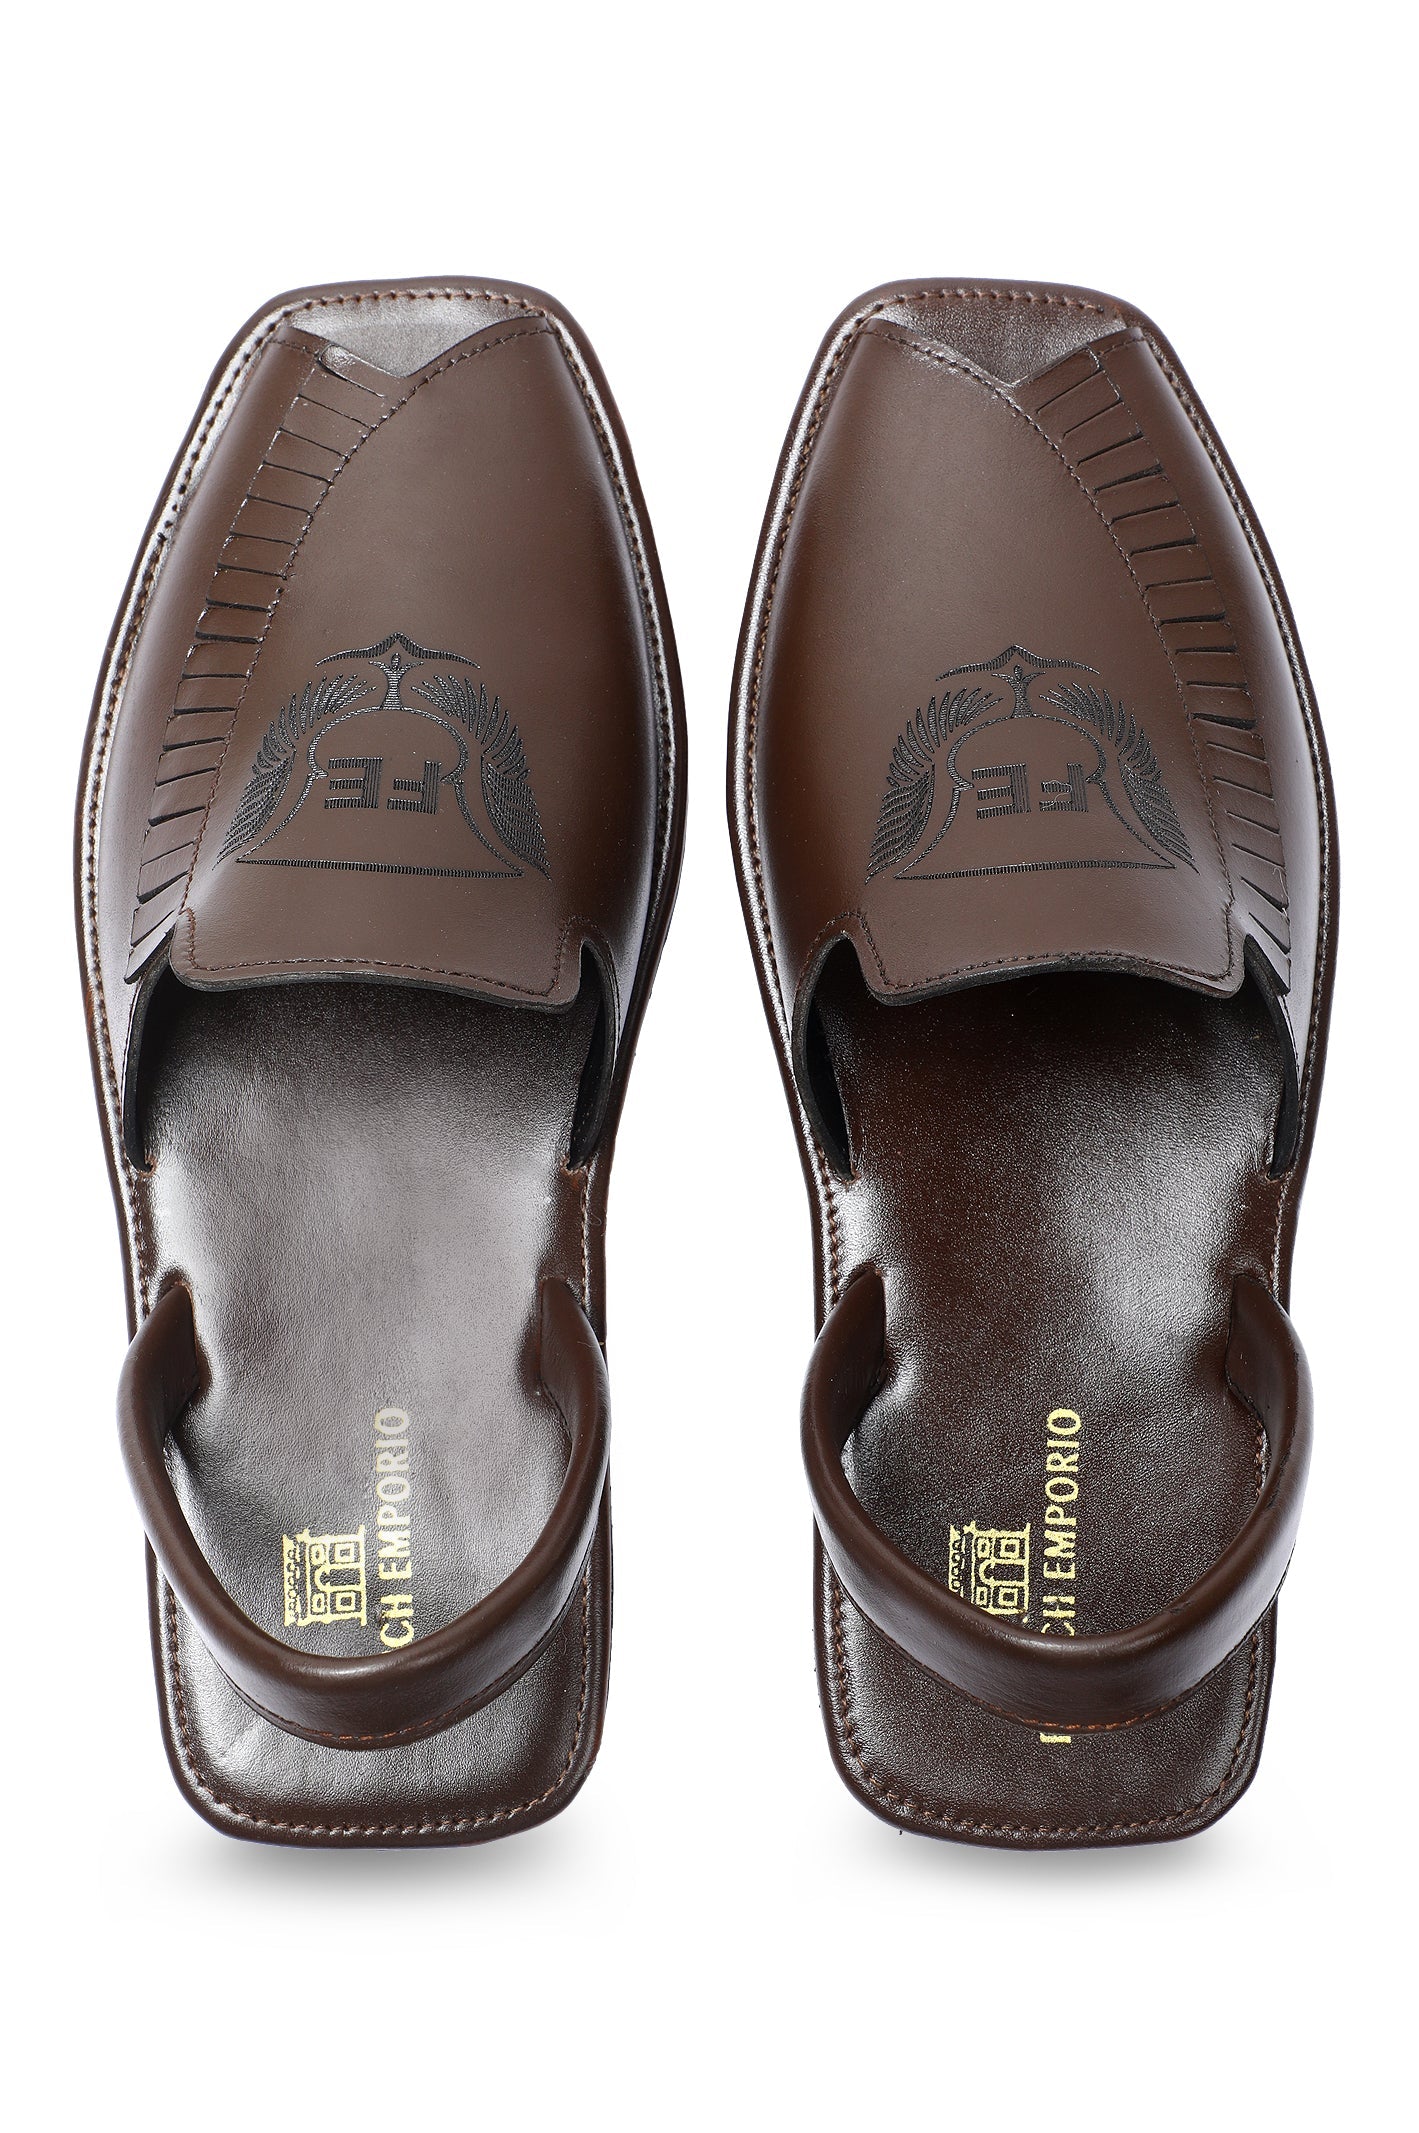 French Emporio Men's Sandal SKU: SLD-0038-BROWN - Diners